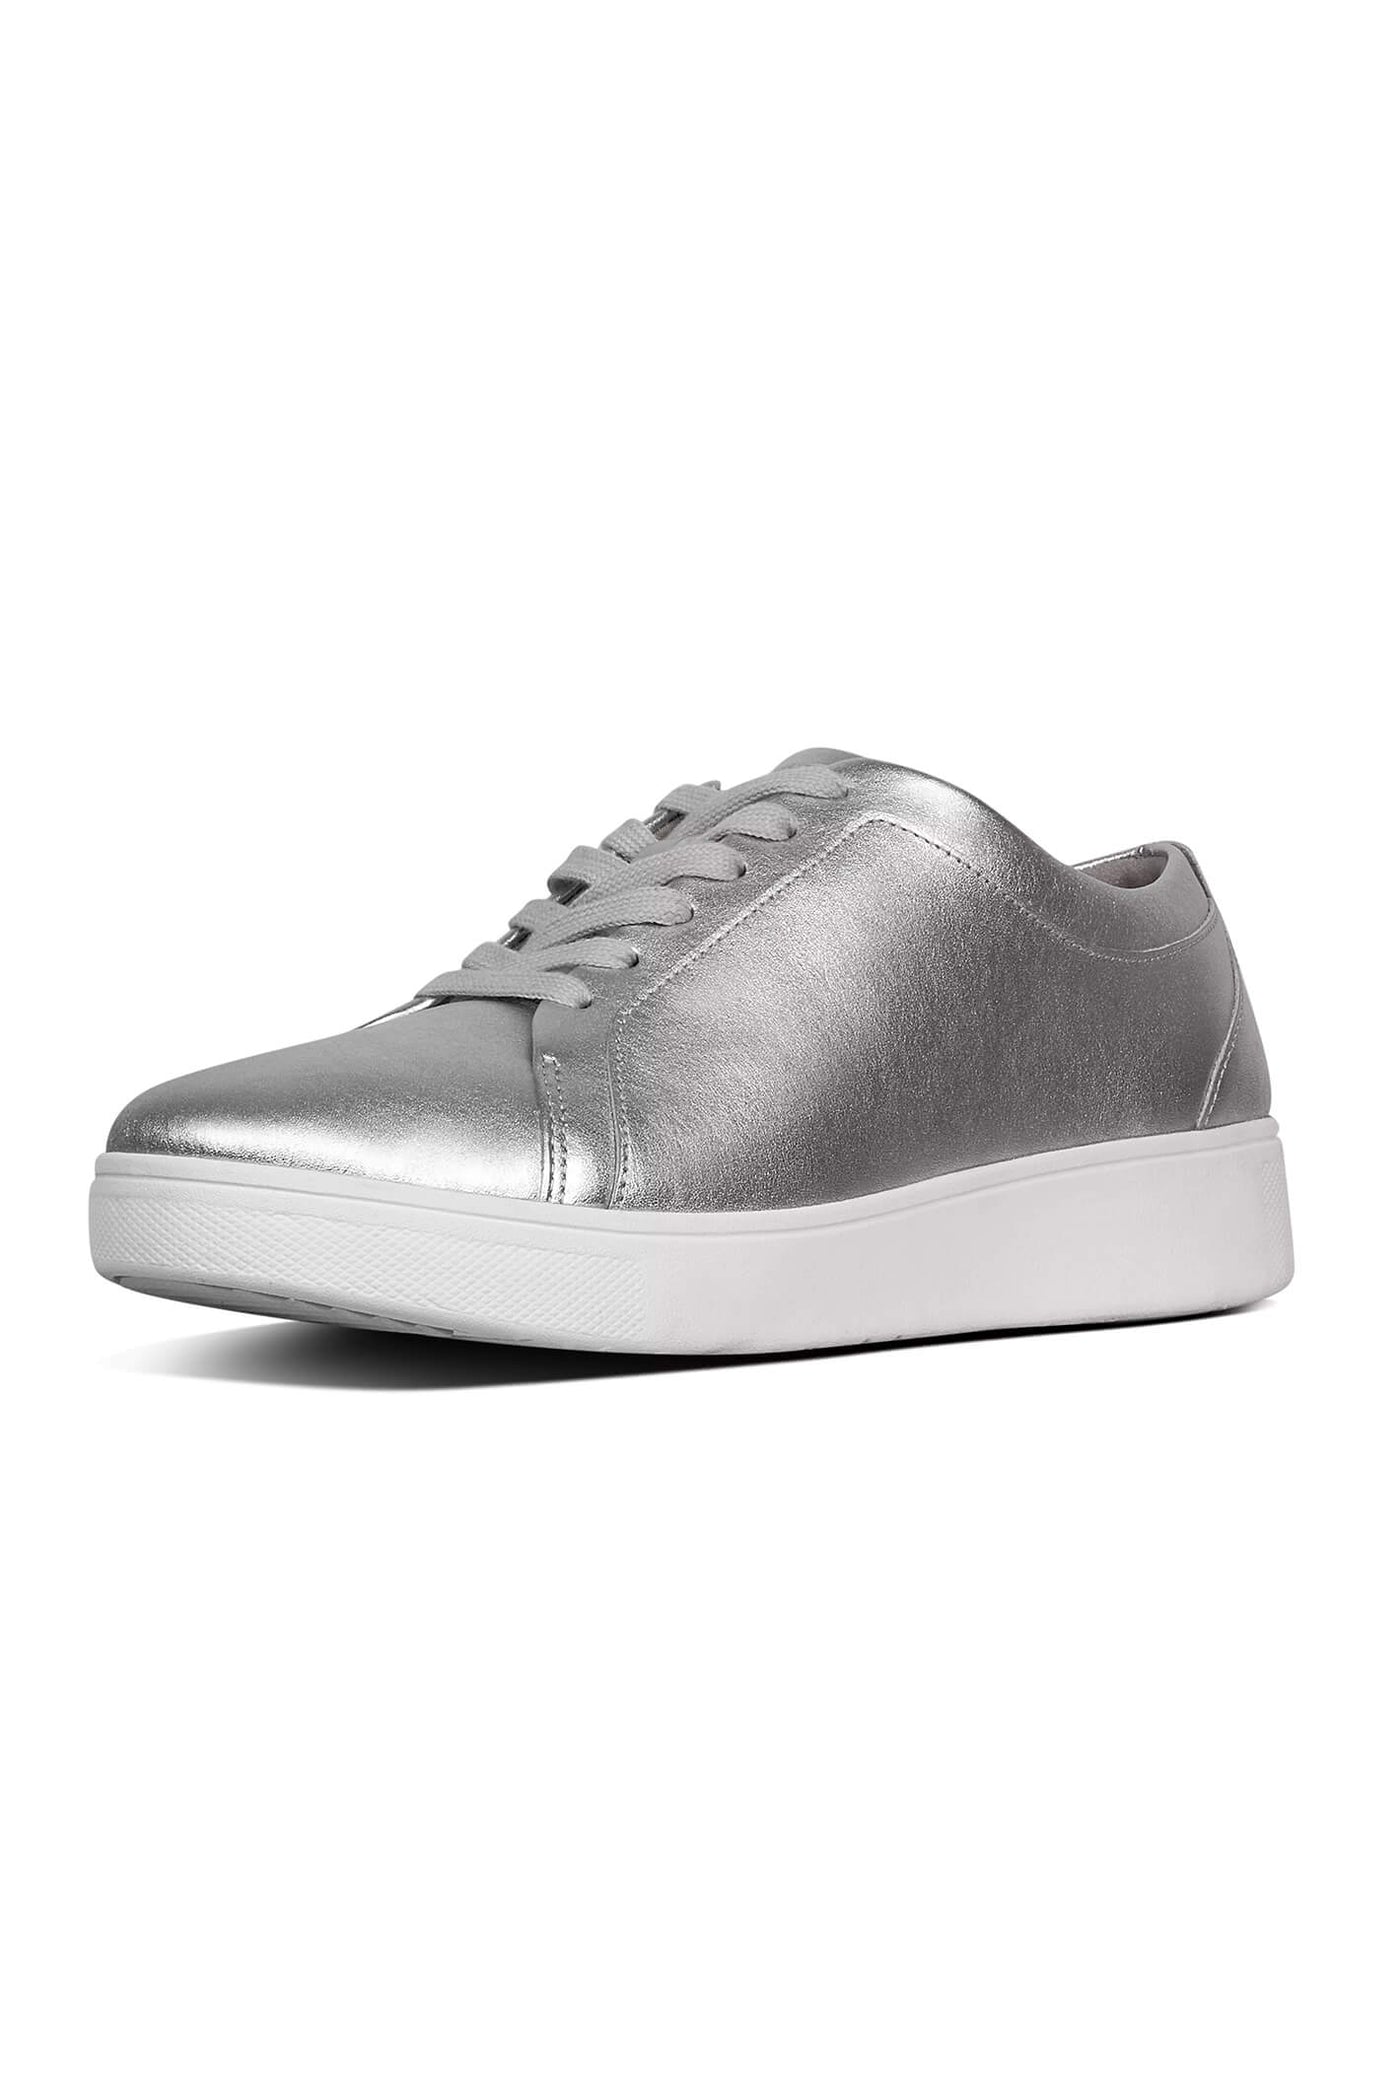 Fitflop Rally X22-011 Silver Trainer | Shirley Allum